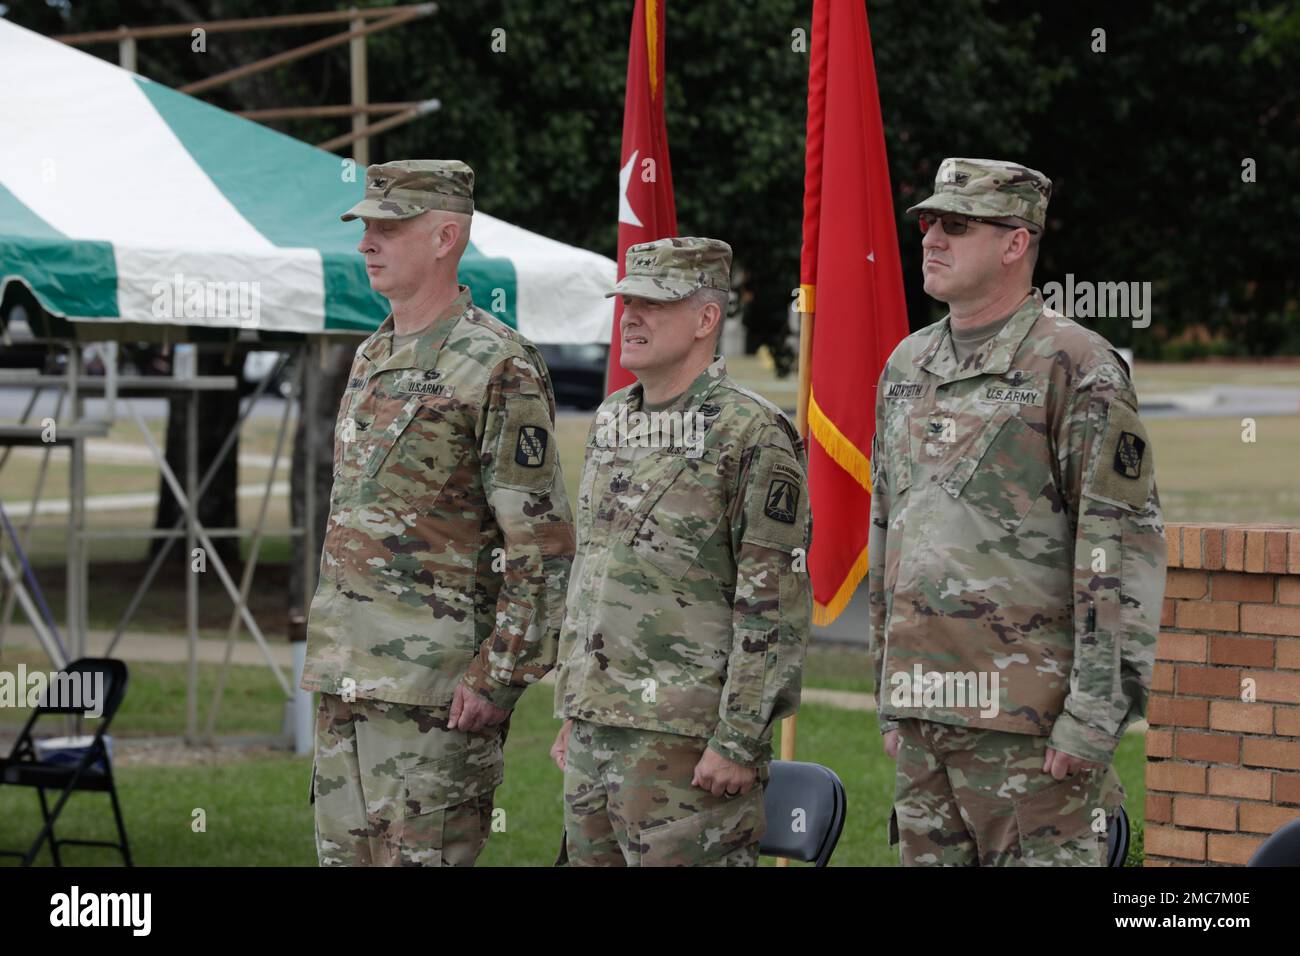 U.S. Army Col. Travis A. Hartman (left) reliquished command of the 359th TTSB to Col. Tracy G. Monteith(right), ceremony was presided over by Major. Gen. John H. Phillips(middle),  commanding general, 335th Signal Command Theater at Barton Field on Fort Gordon in Augusta, GA, June 26, 2022. Stock Photo